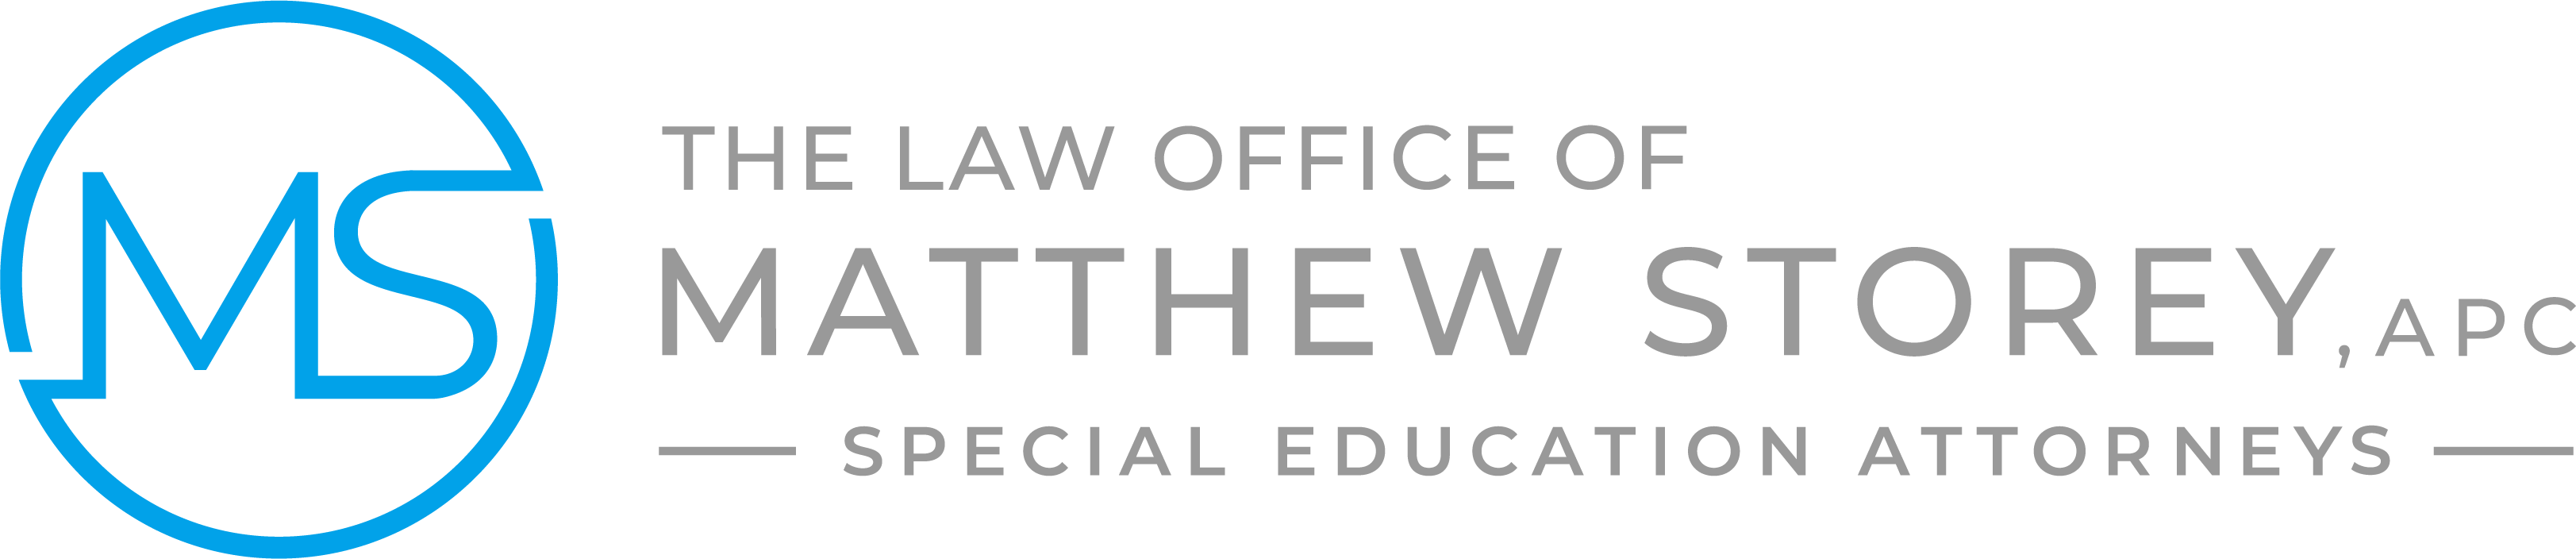 Special Education & Civil Rights Lawyer | The Law Office of Matthew H. Storey